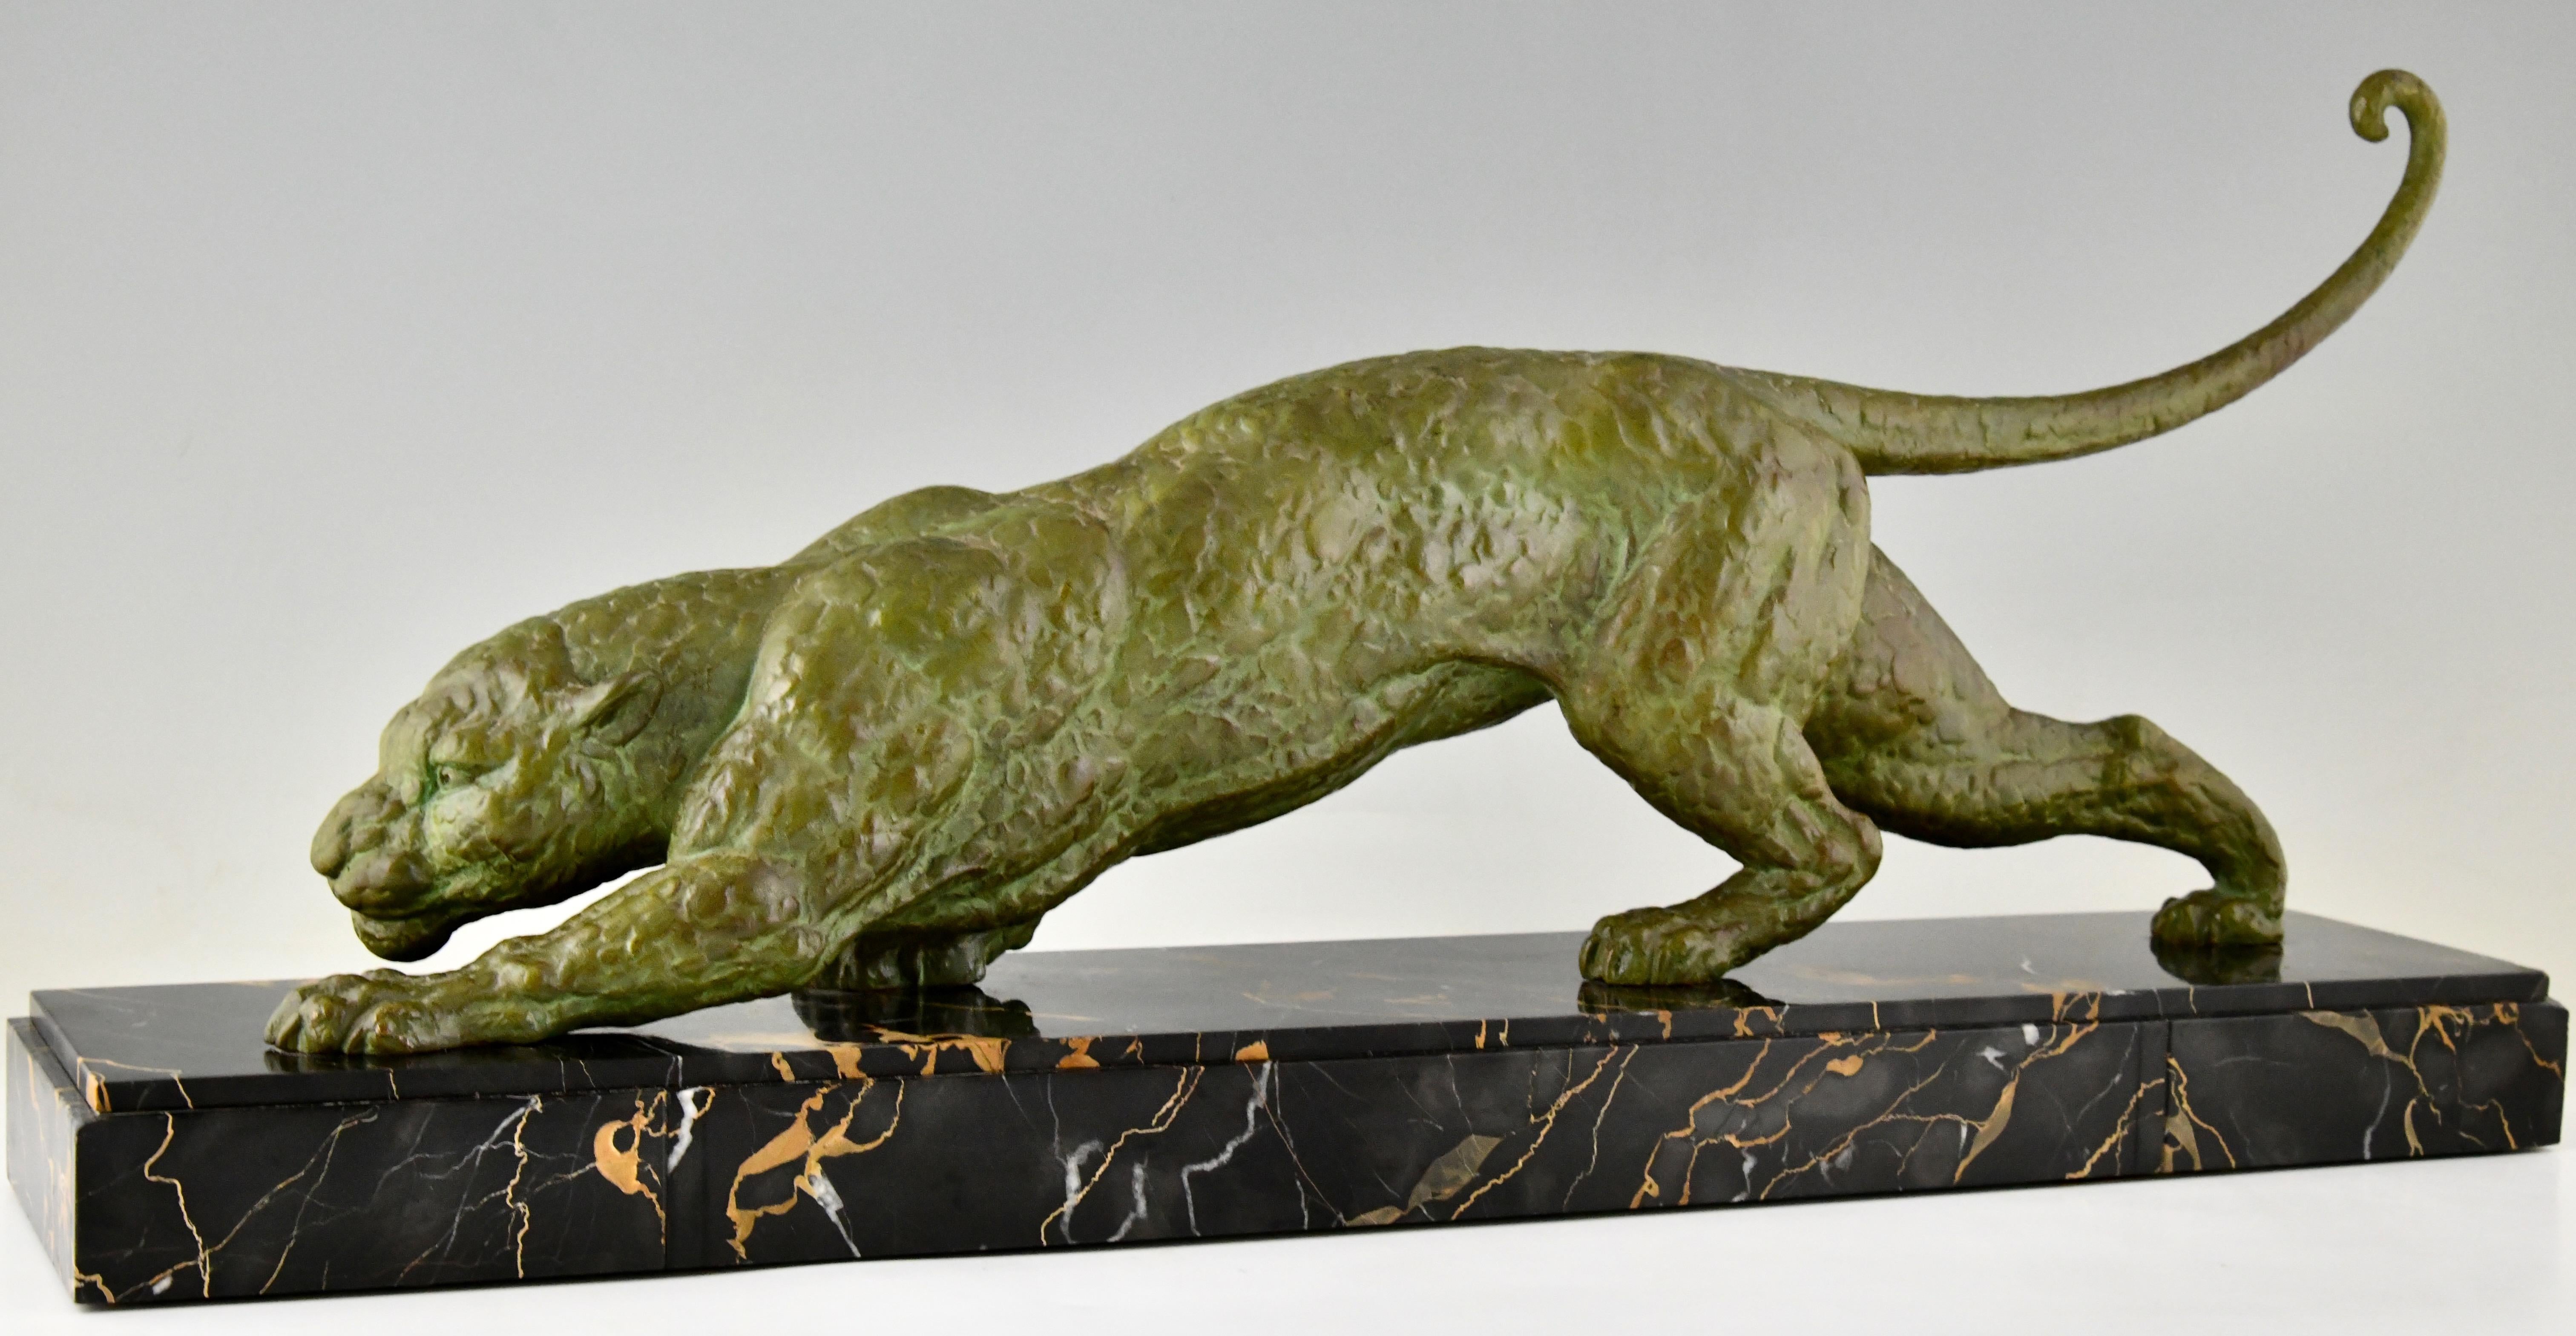 Art Deco sculpture of a panther by Demetre Chiparus. 
Art metal with beautiful patina on a marble base with inlay. 
France 1930.
This panther is illustrated in:
Chiparus master of Art Deco, A. Shayo. 

General information:
Art Deco and other